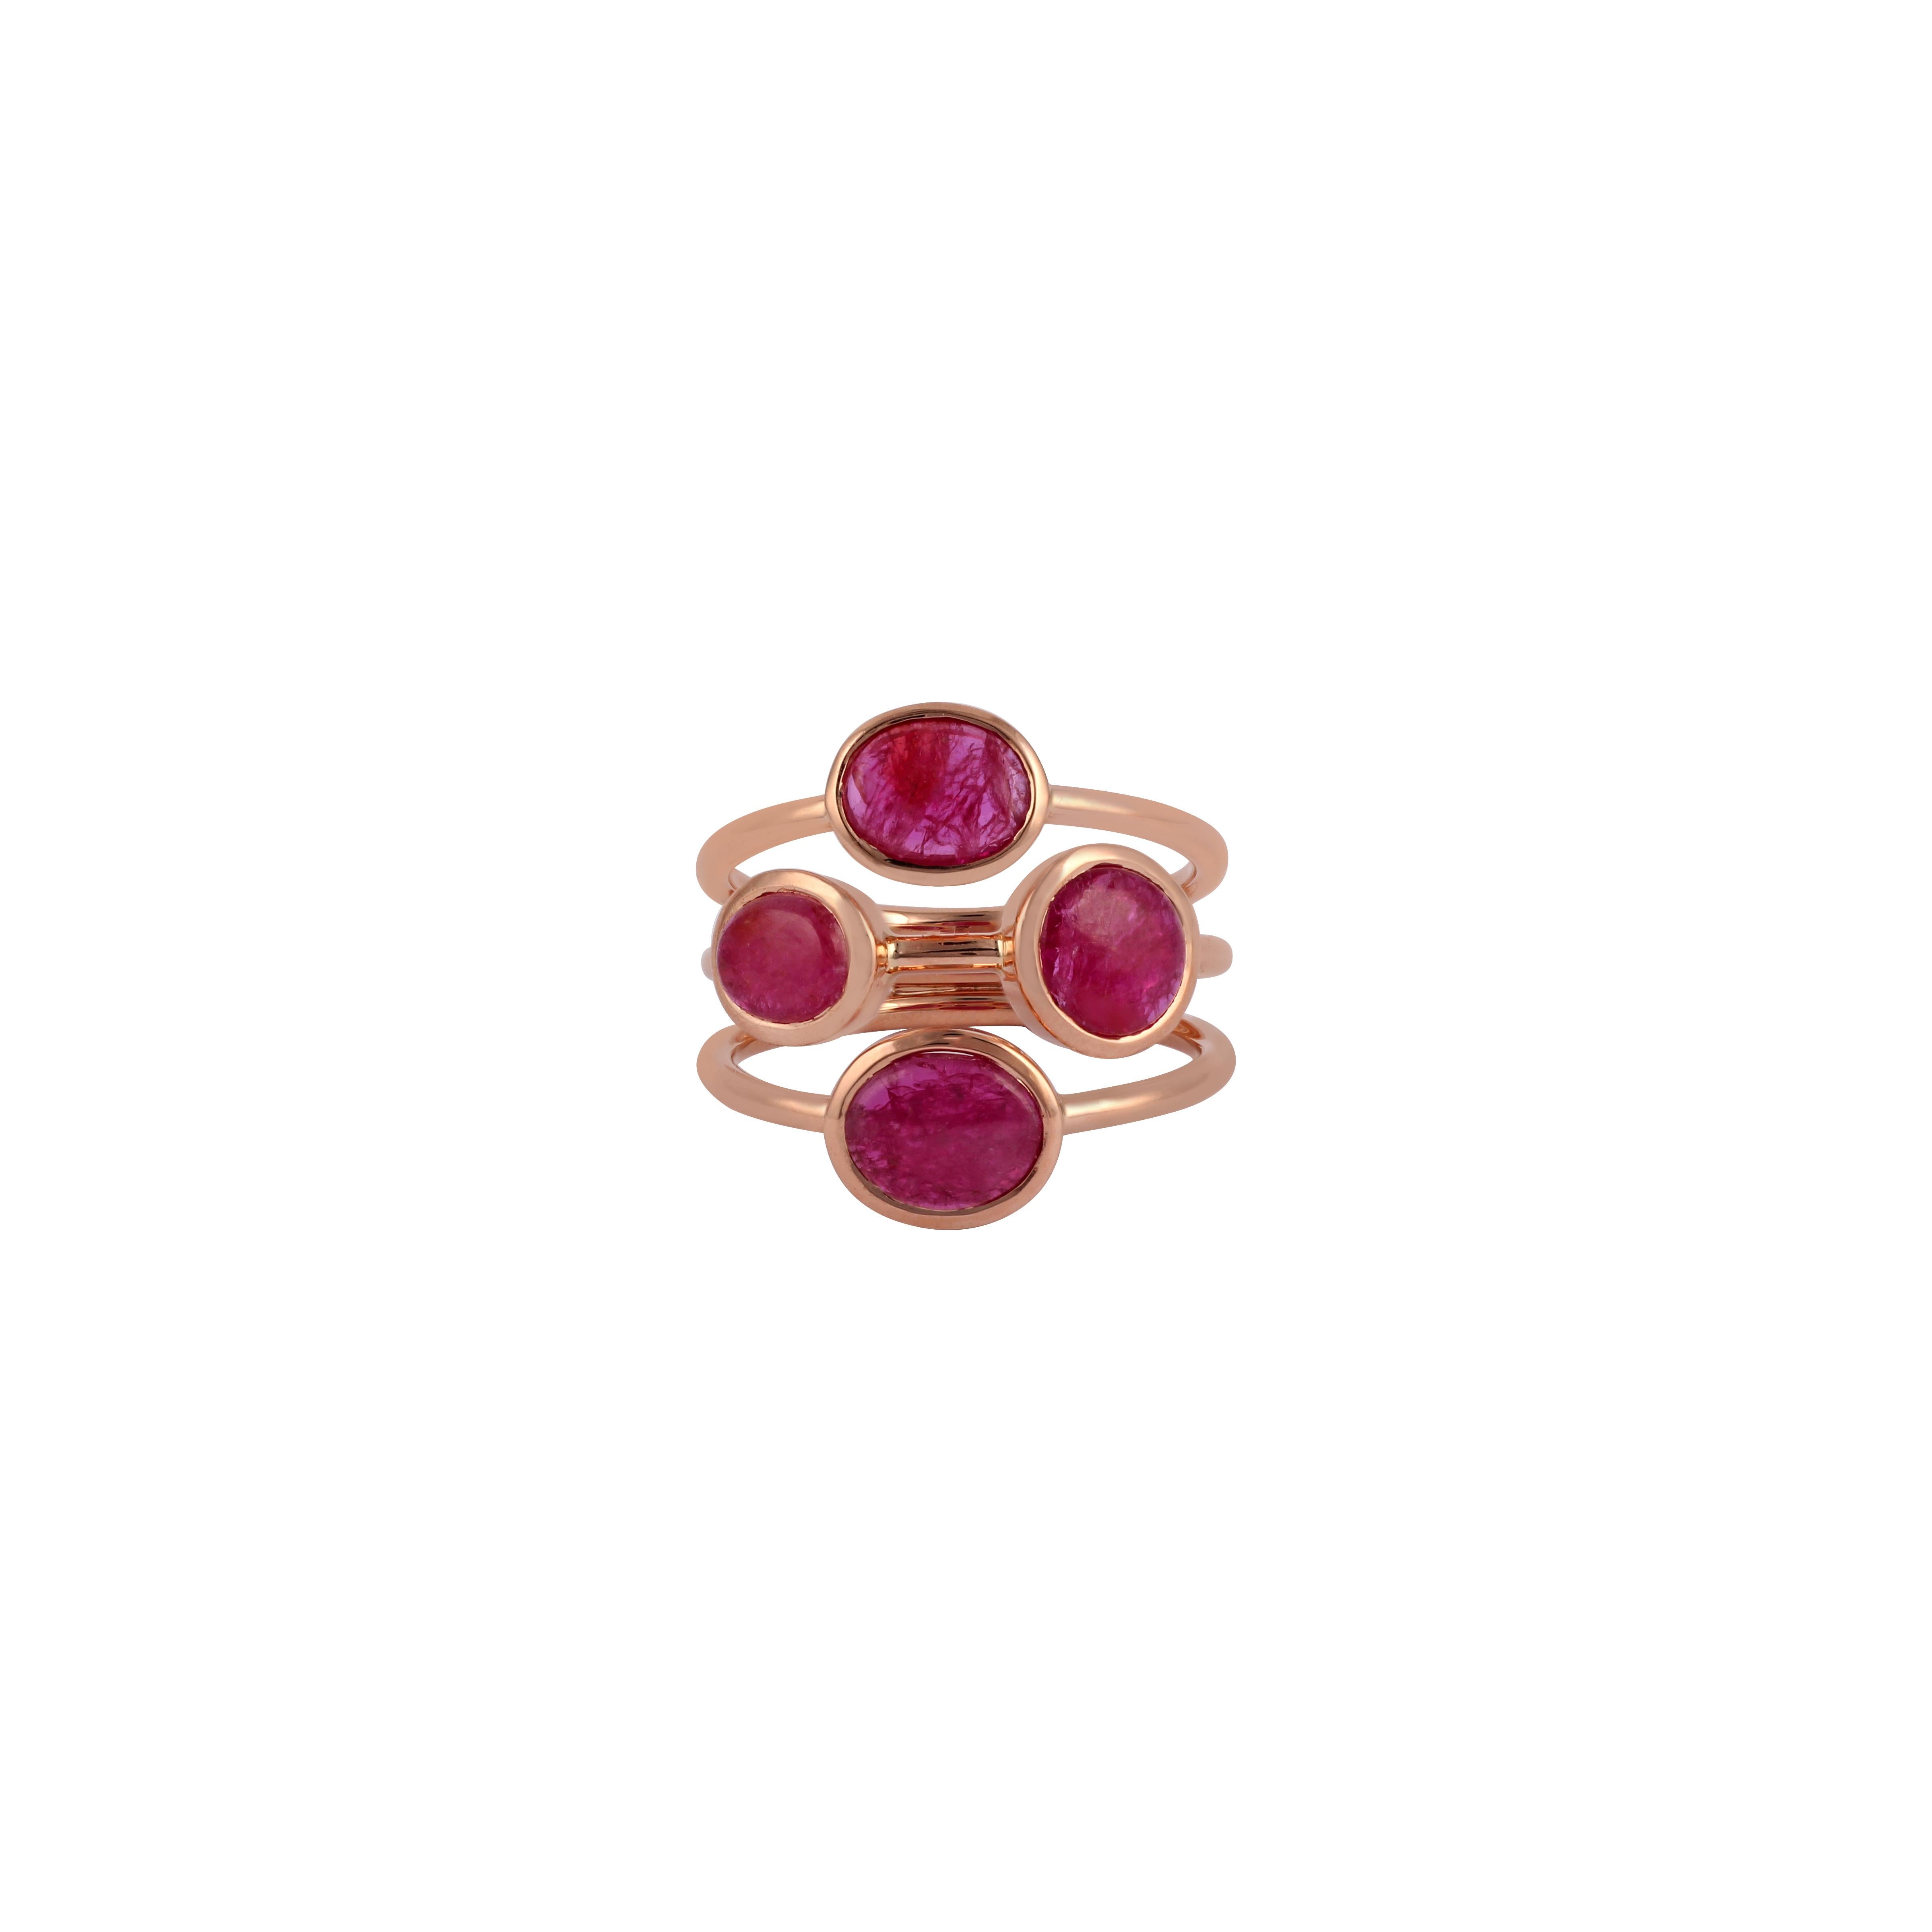 Its an elegant ring studded in 18k rose gold with 4 pieces Mozambique natural ruby weight 3.52 carat, this entire ring studded in 18k rose gold weight 6.17 grams, ring size can be change as per the requirement.